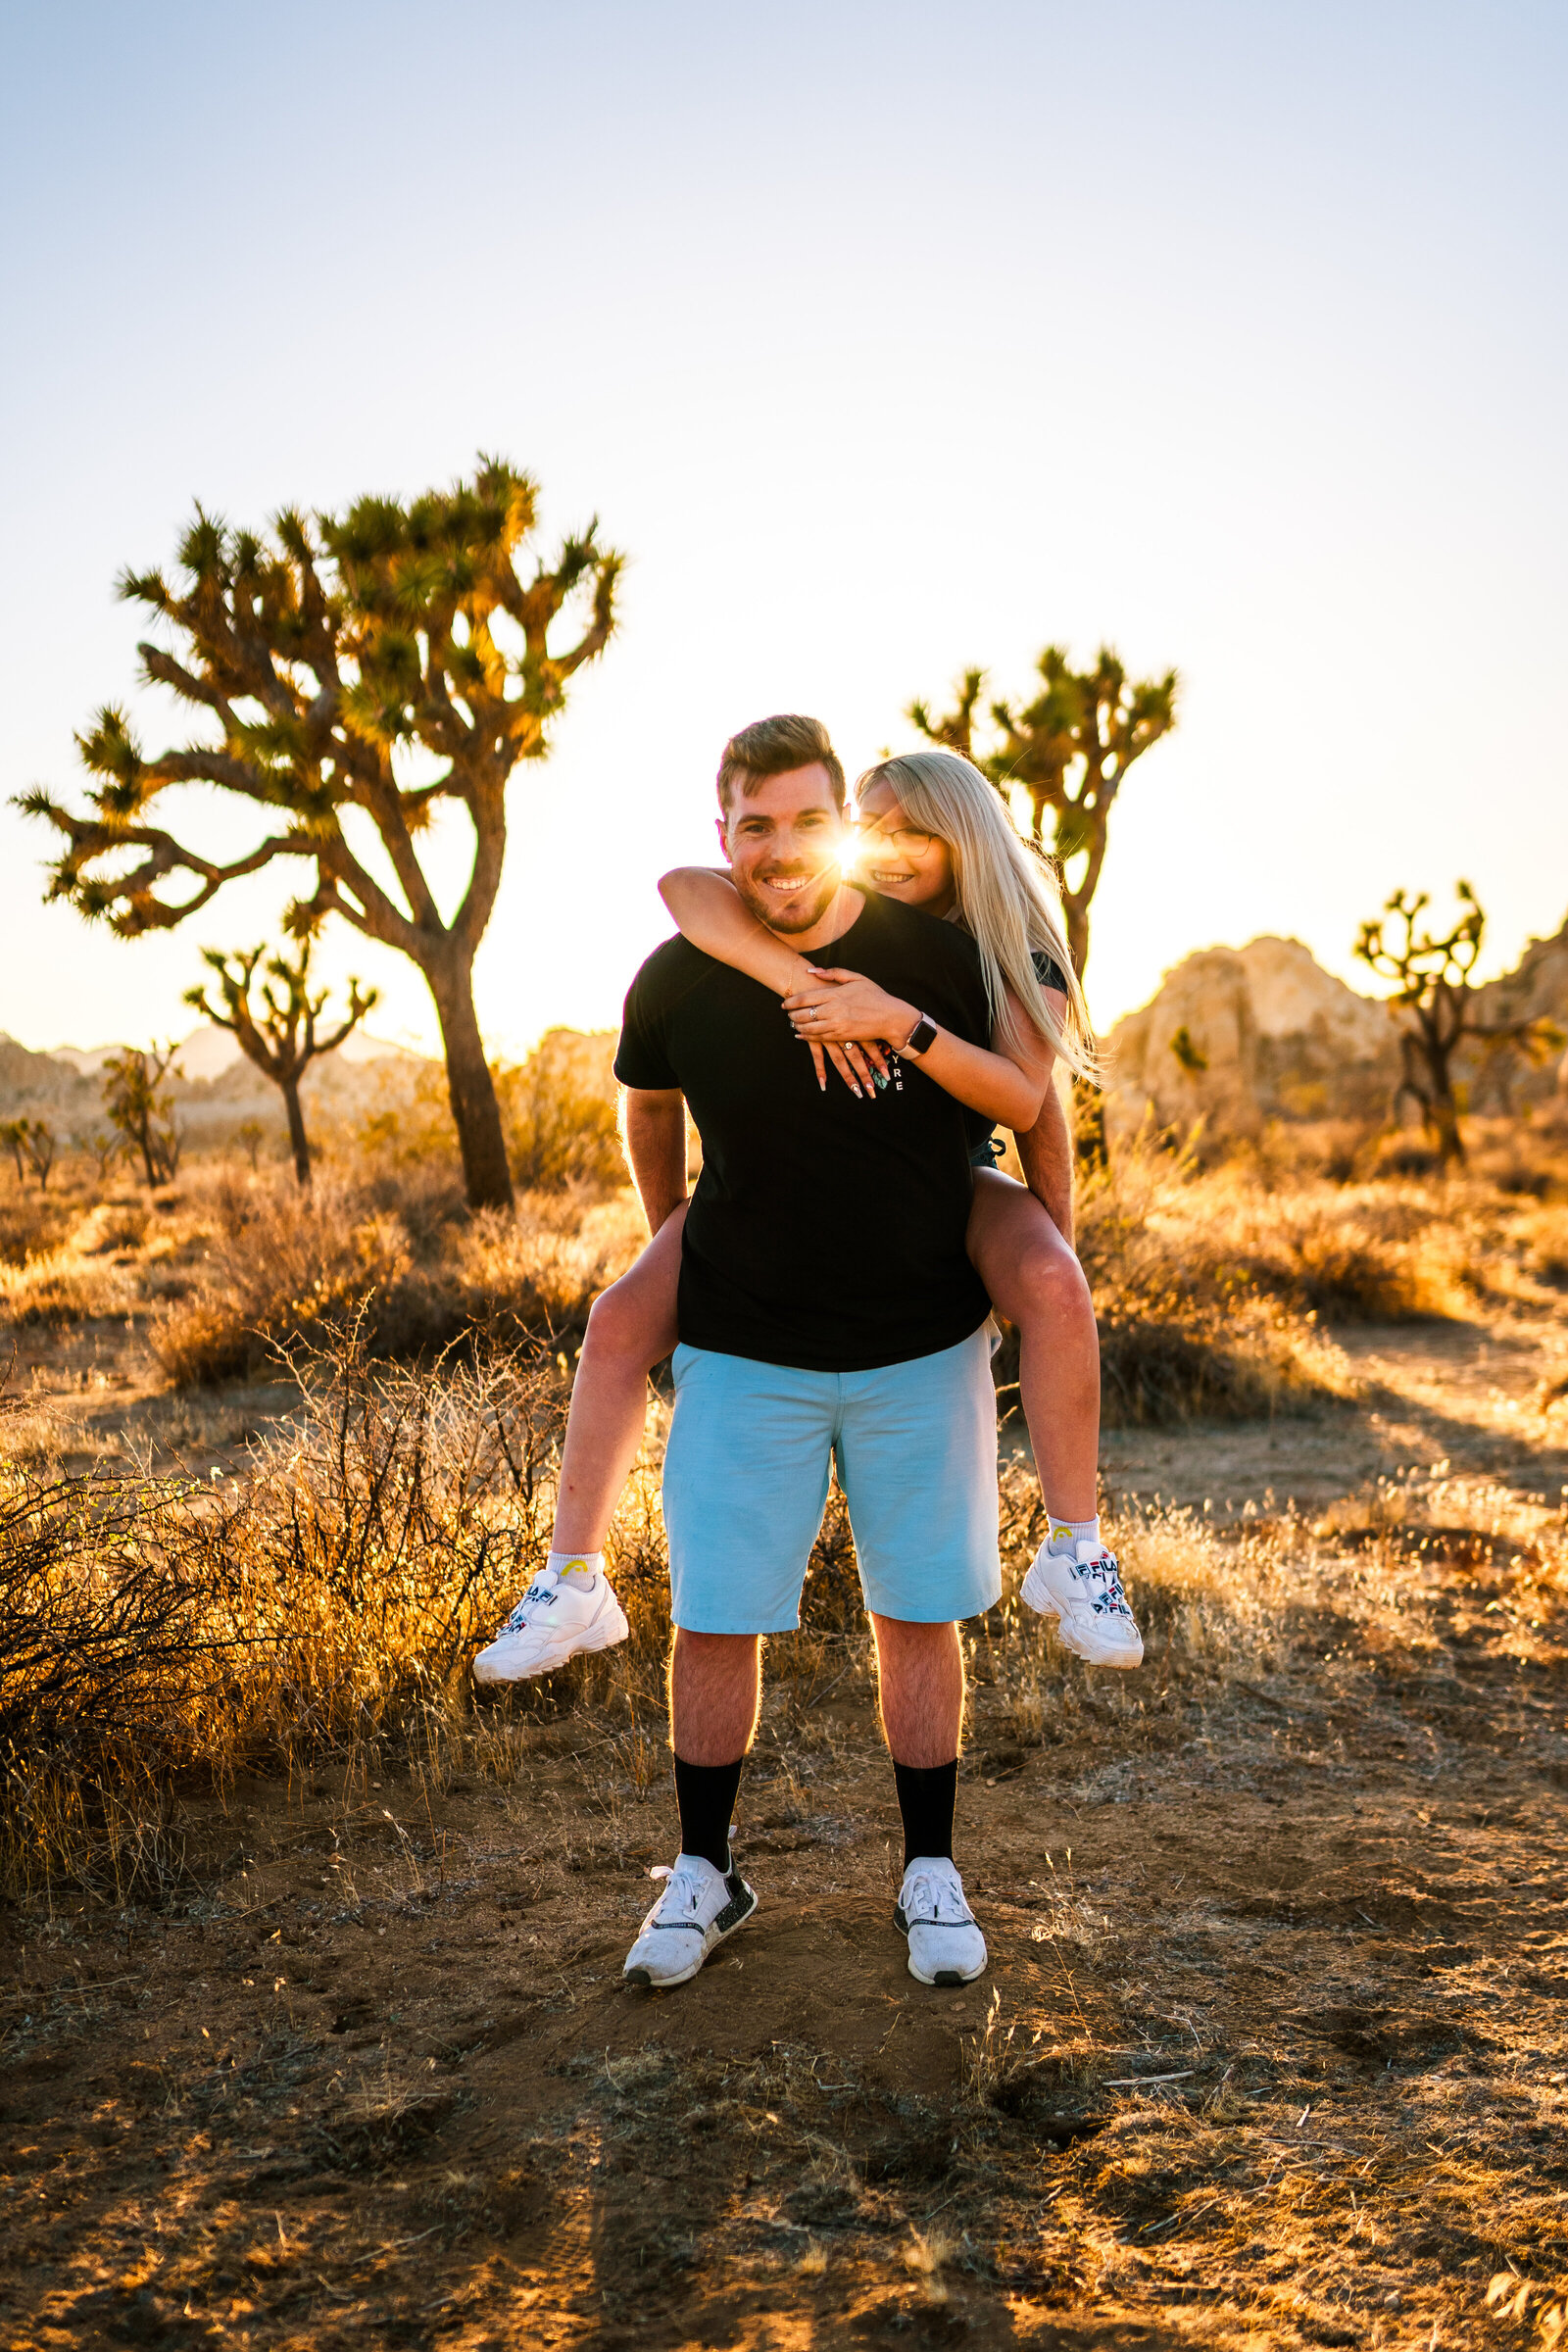 Man carrying woman on his back, with Joshua trees behind them and the sun setting.